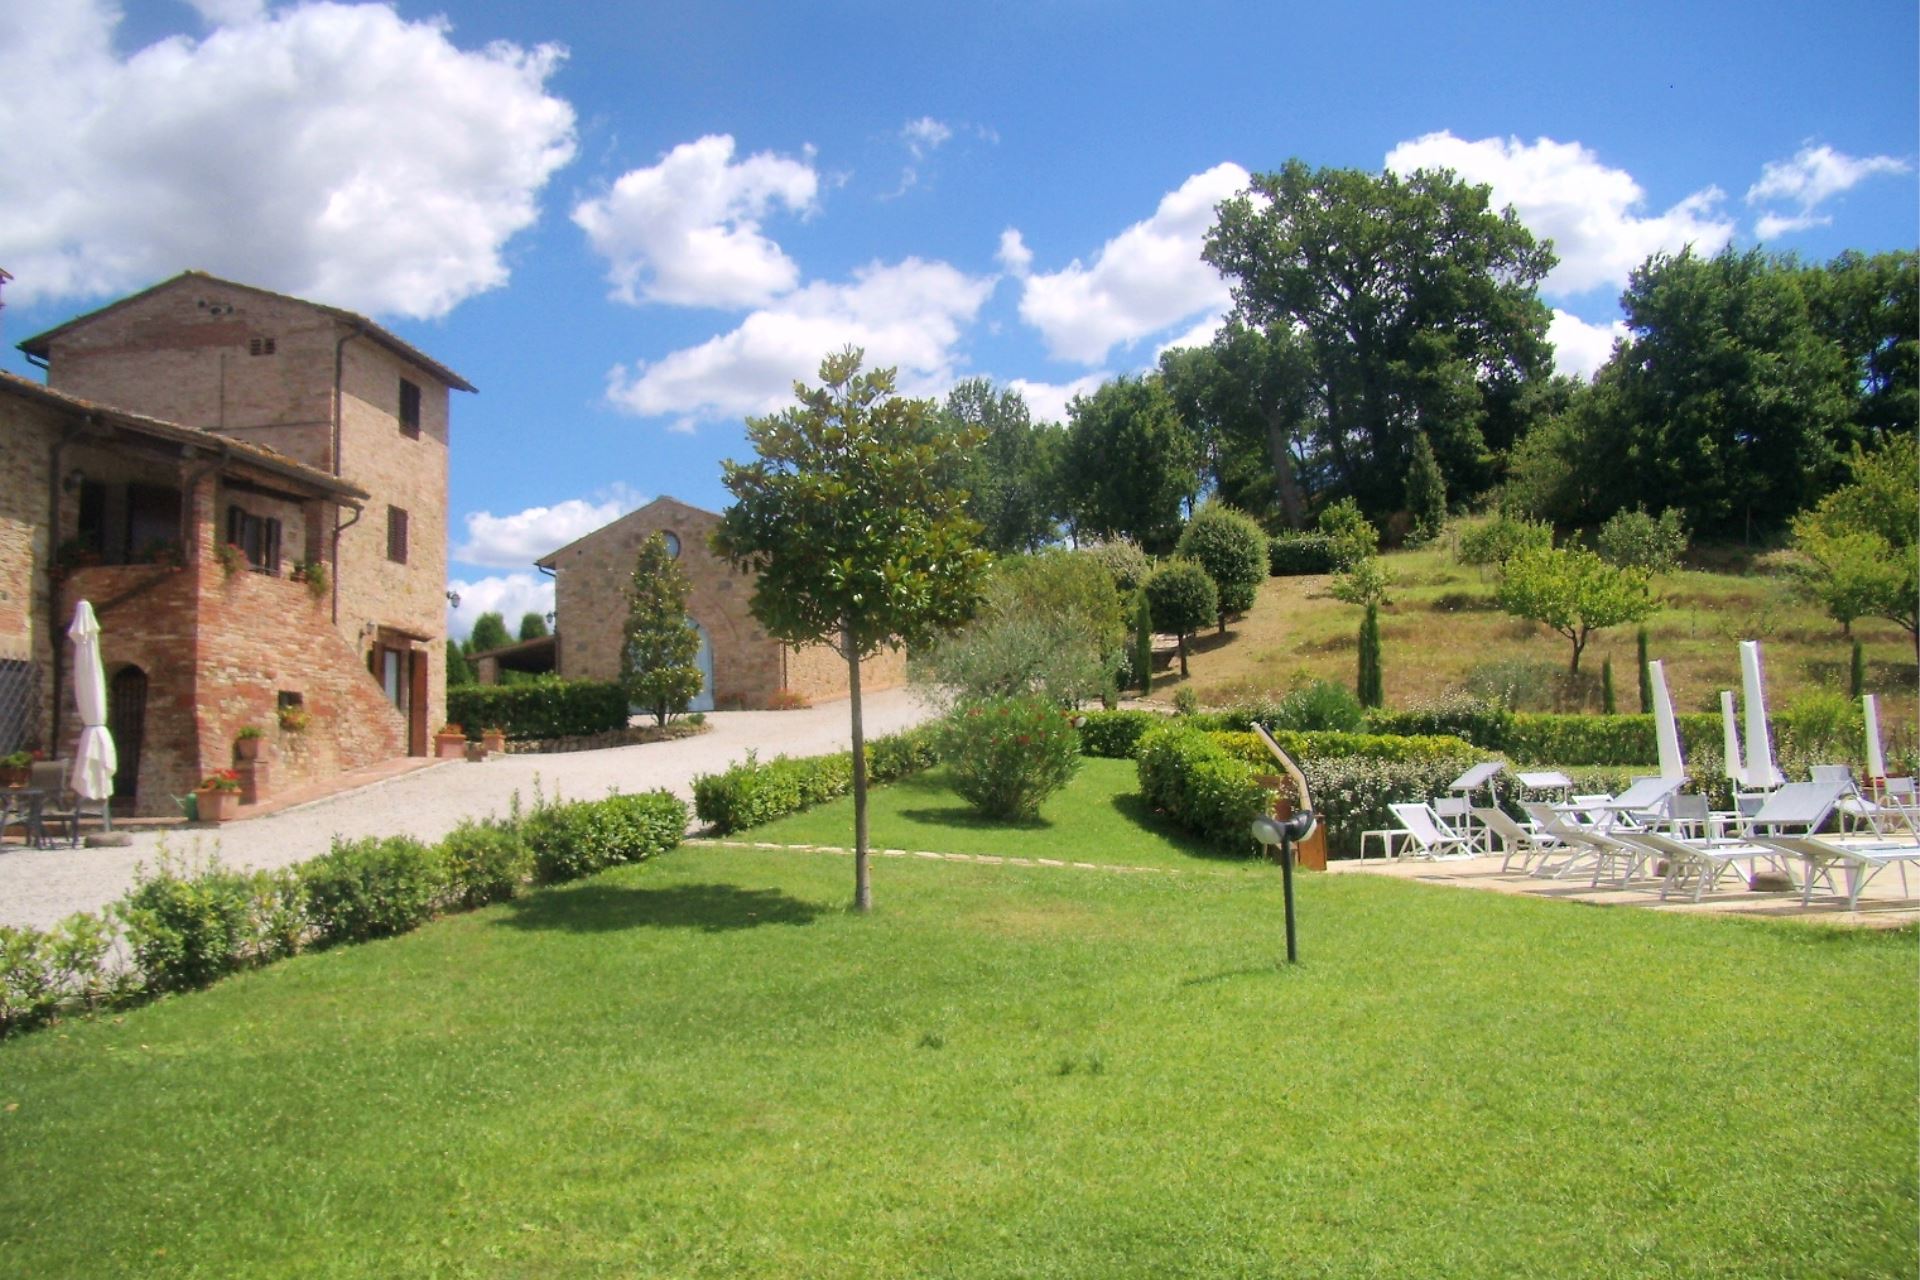 APARTMENTS WITH POOL FILOSTRATO GAMBASSI TERME TOSCANA